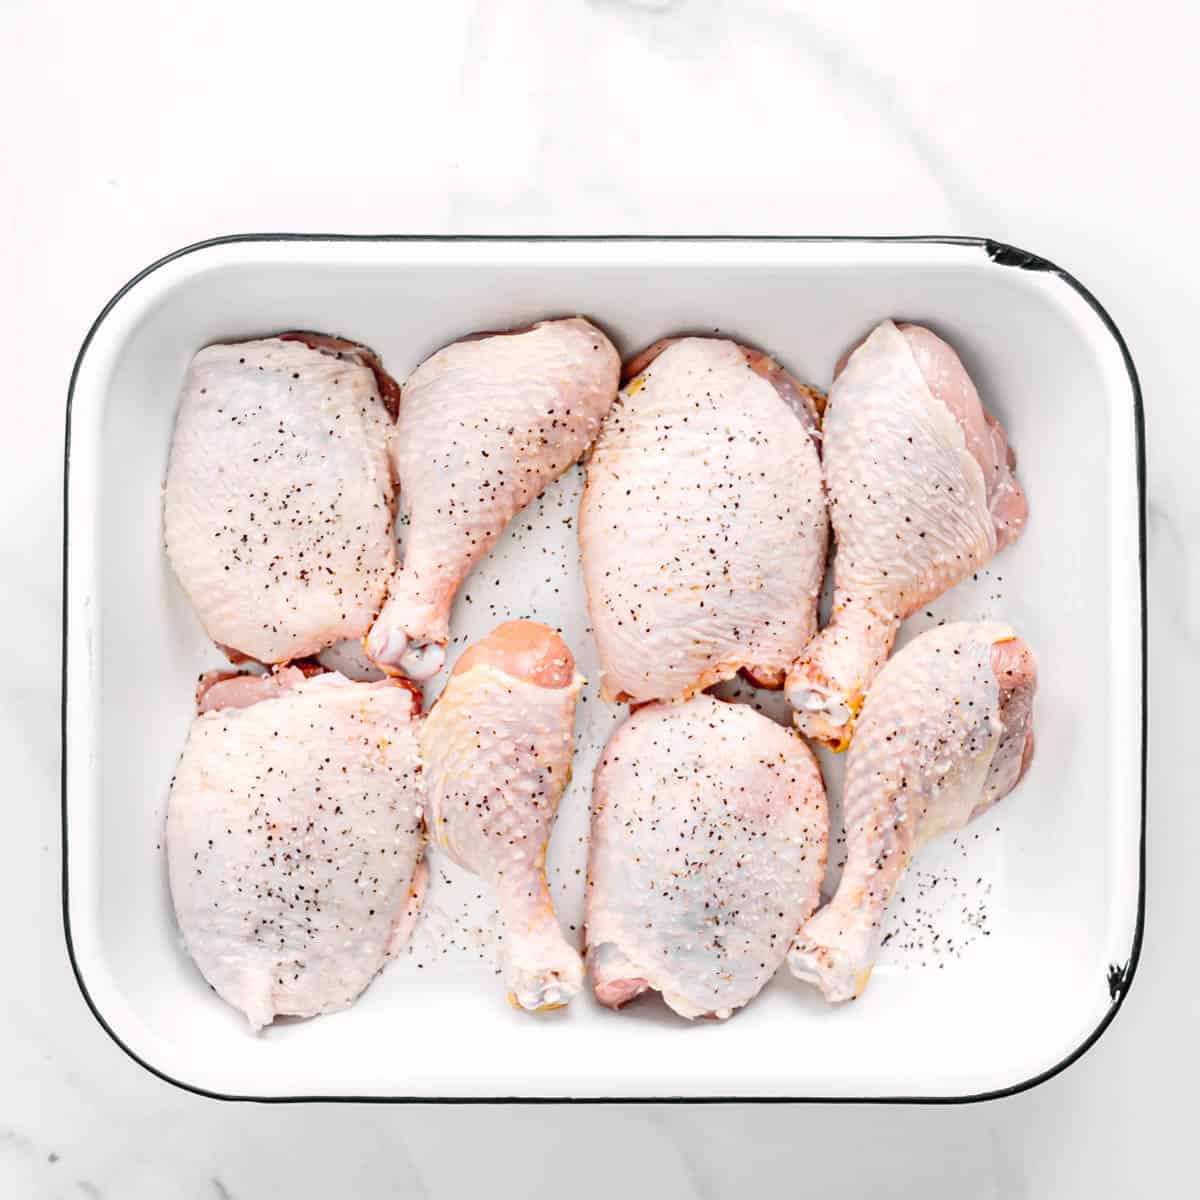 season the chicken with salt and black pepper. 